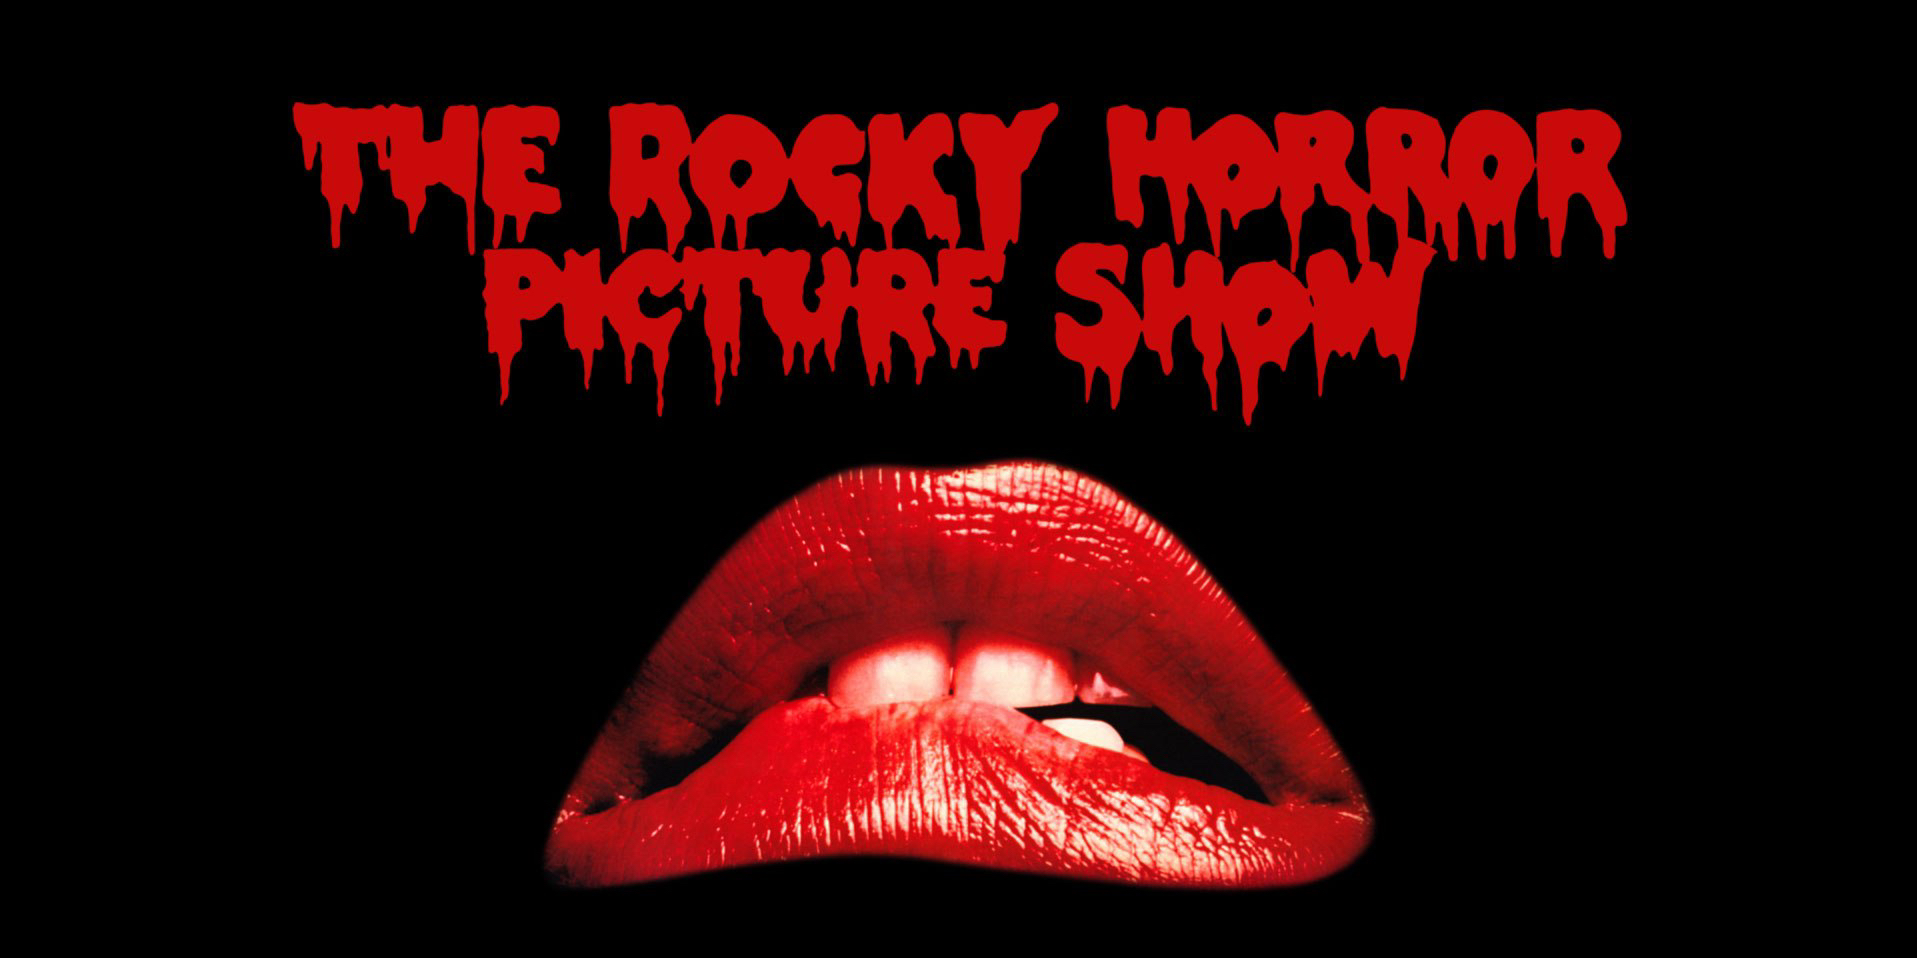 The Rocky Horror Picture Show - Wallpaper #1